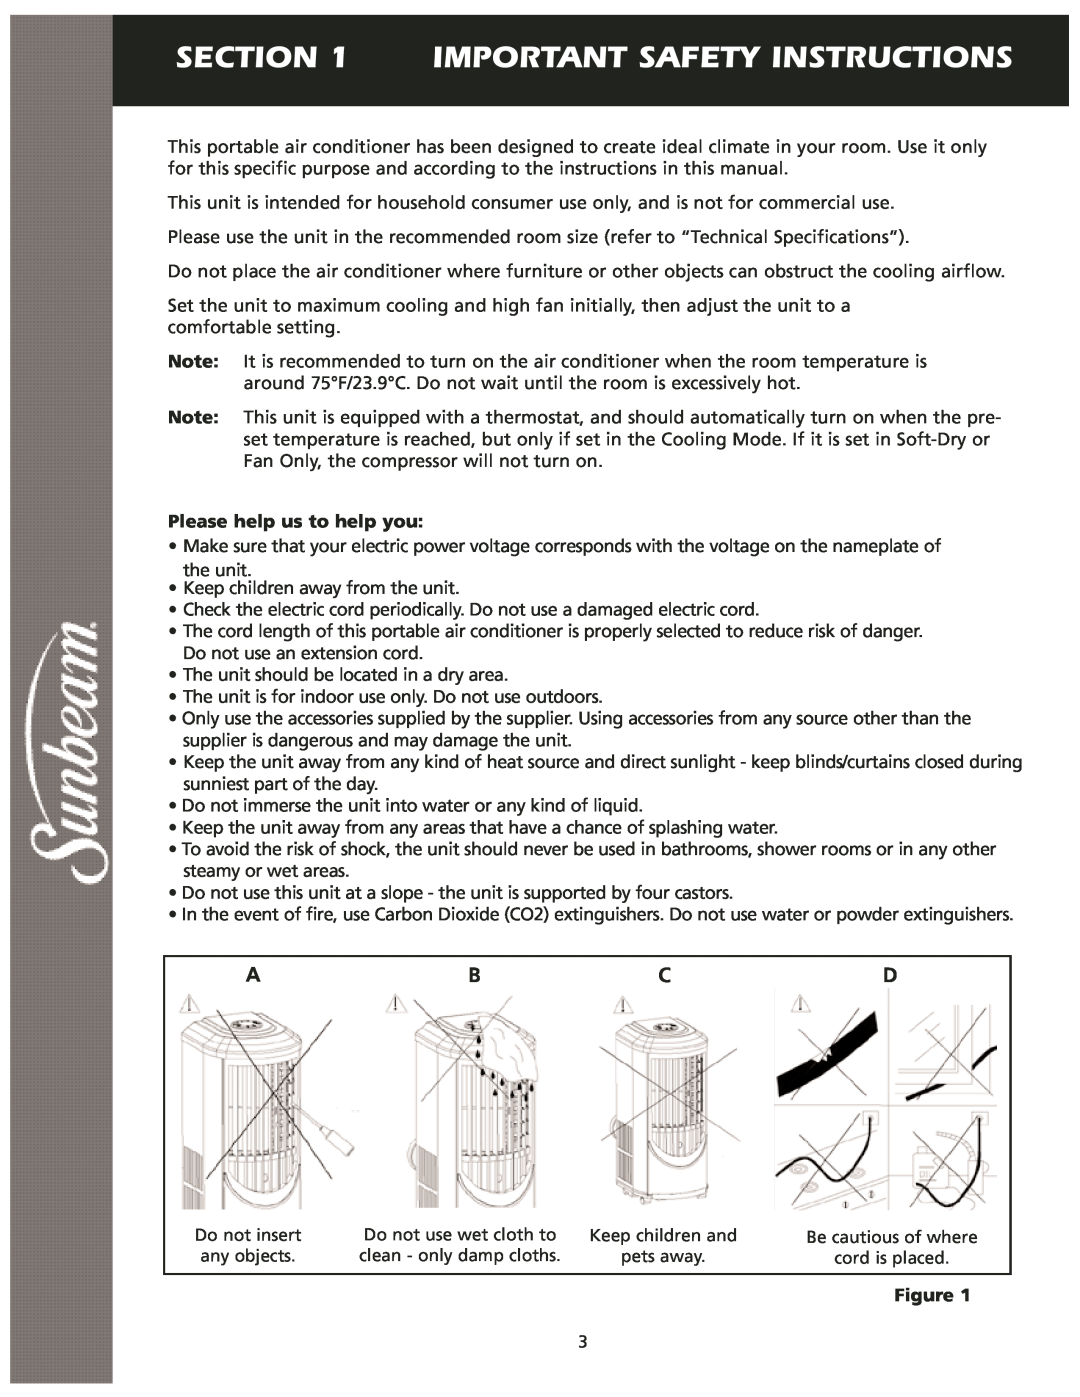 Sunbeam KY-25 user manual Important Safety Instructions, Please help us to help you 